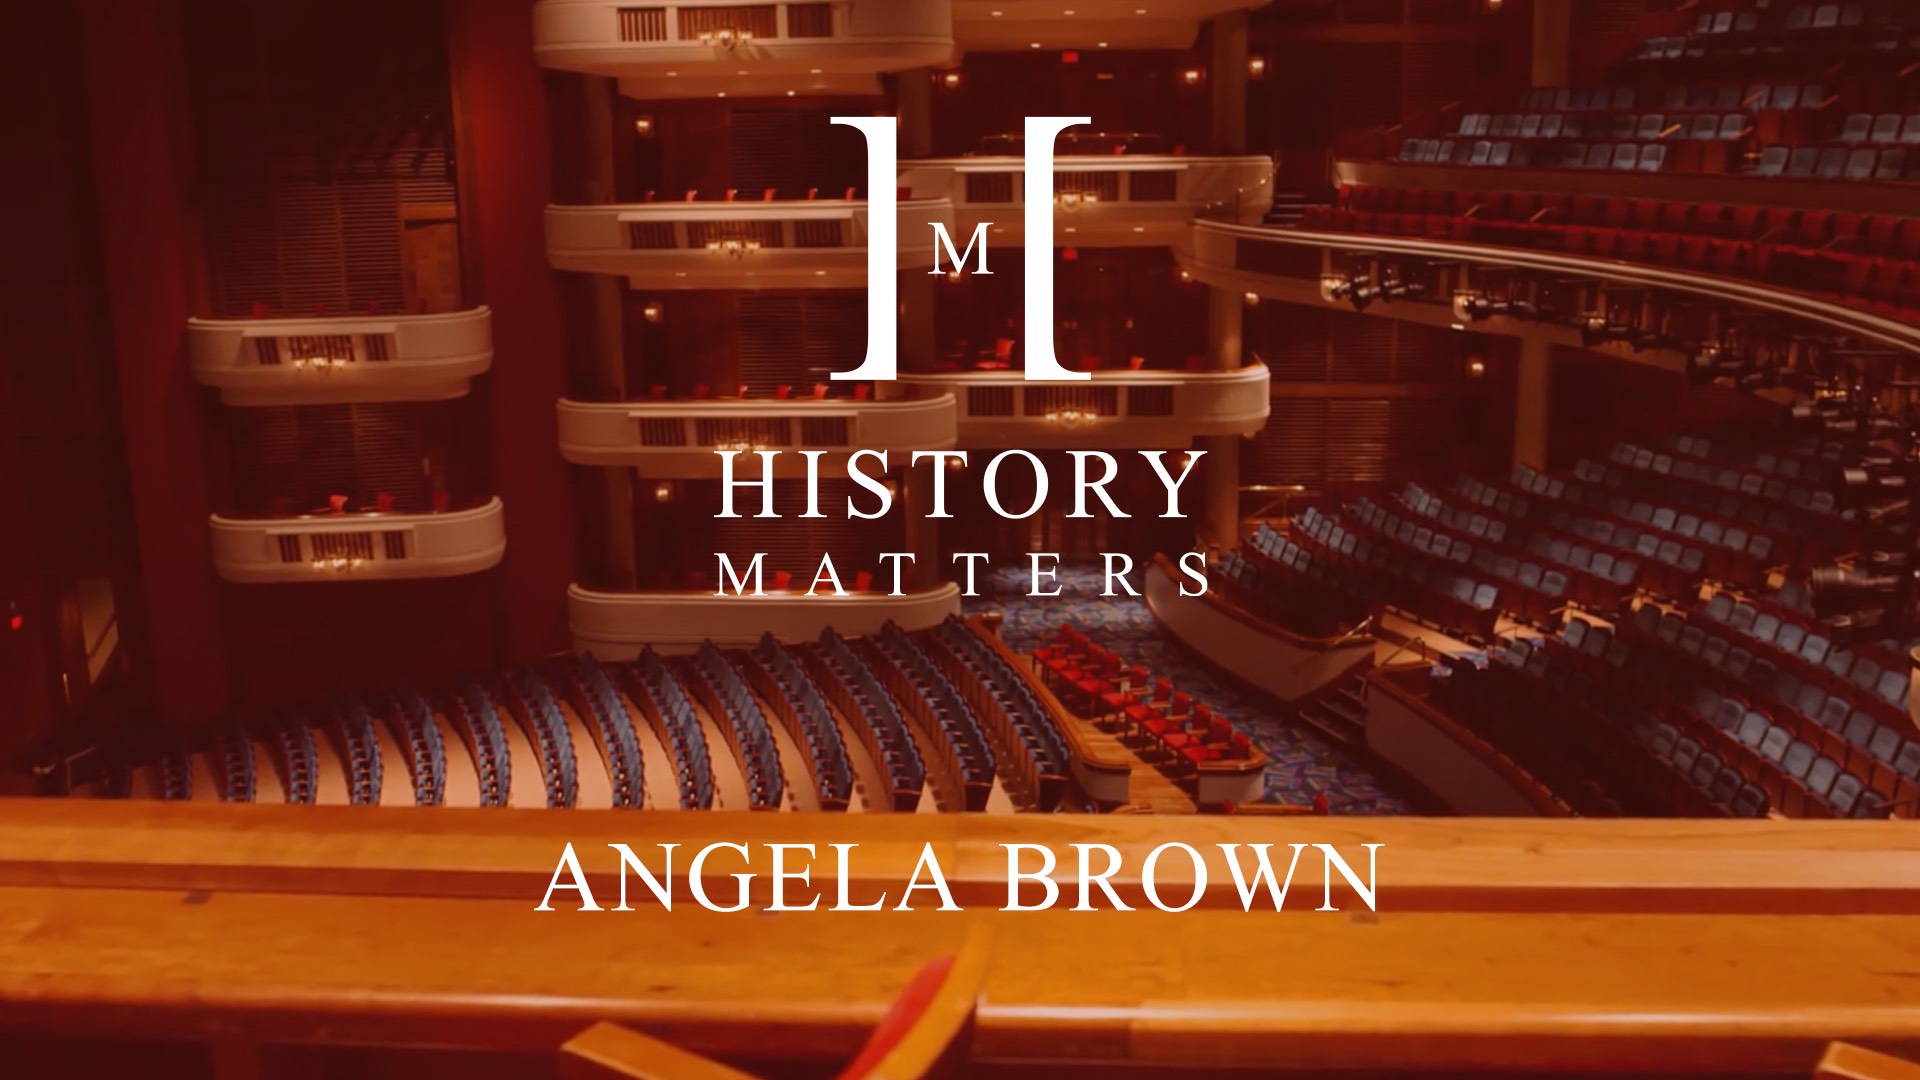 History Matters Angela Brown by Victoria Ranger with background showing interior of a theater from a balcony